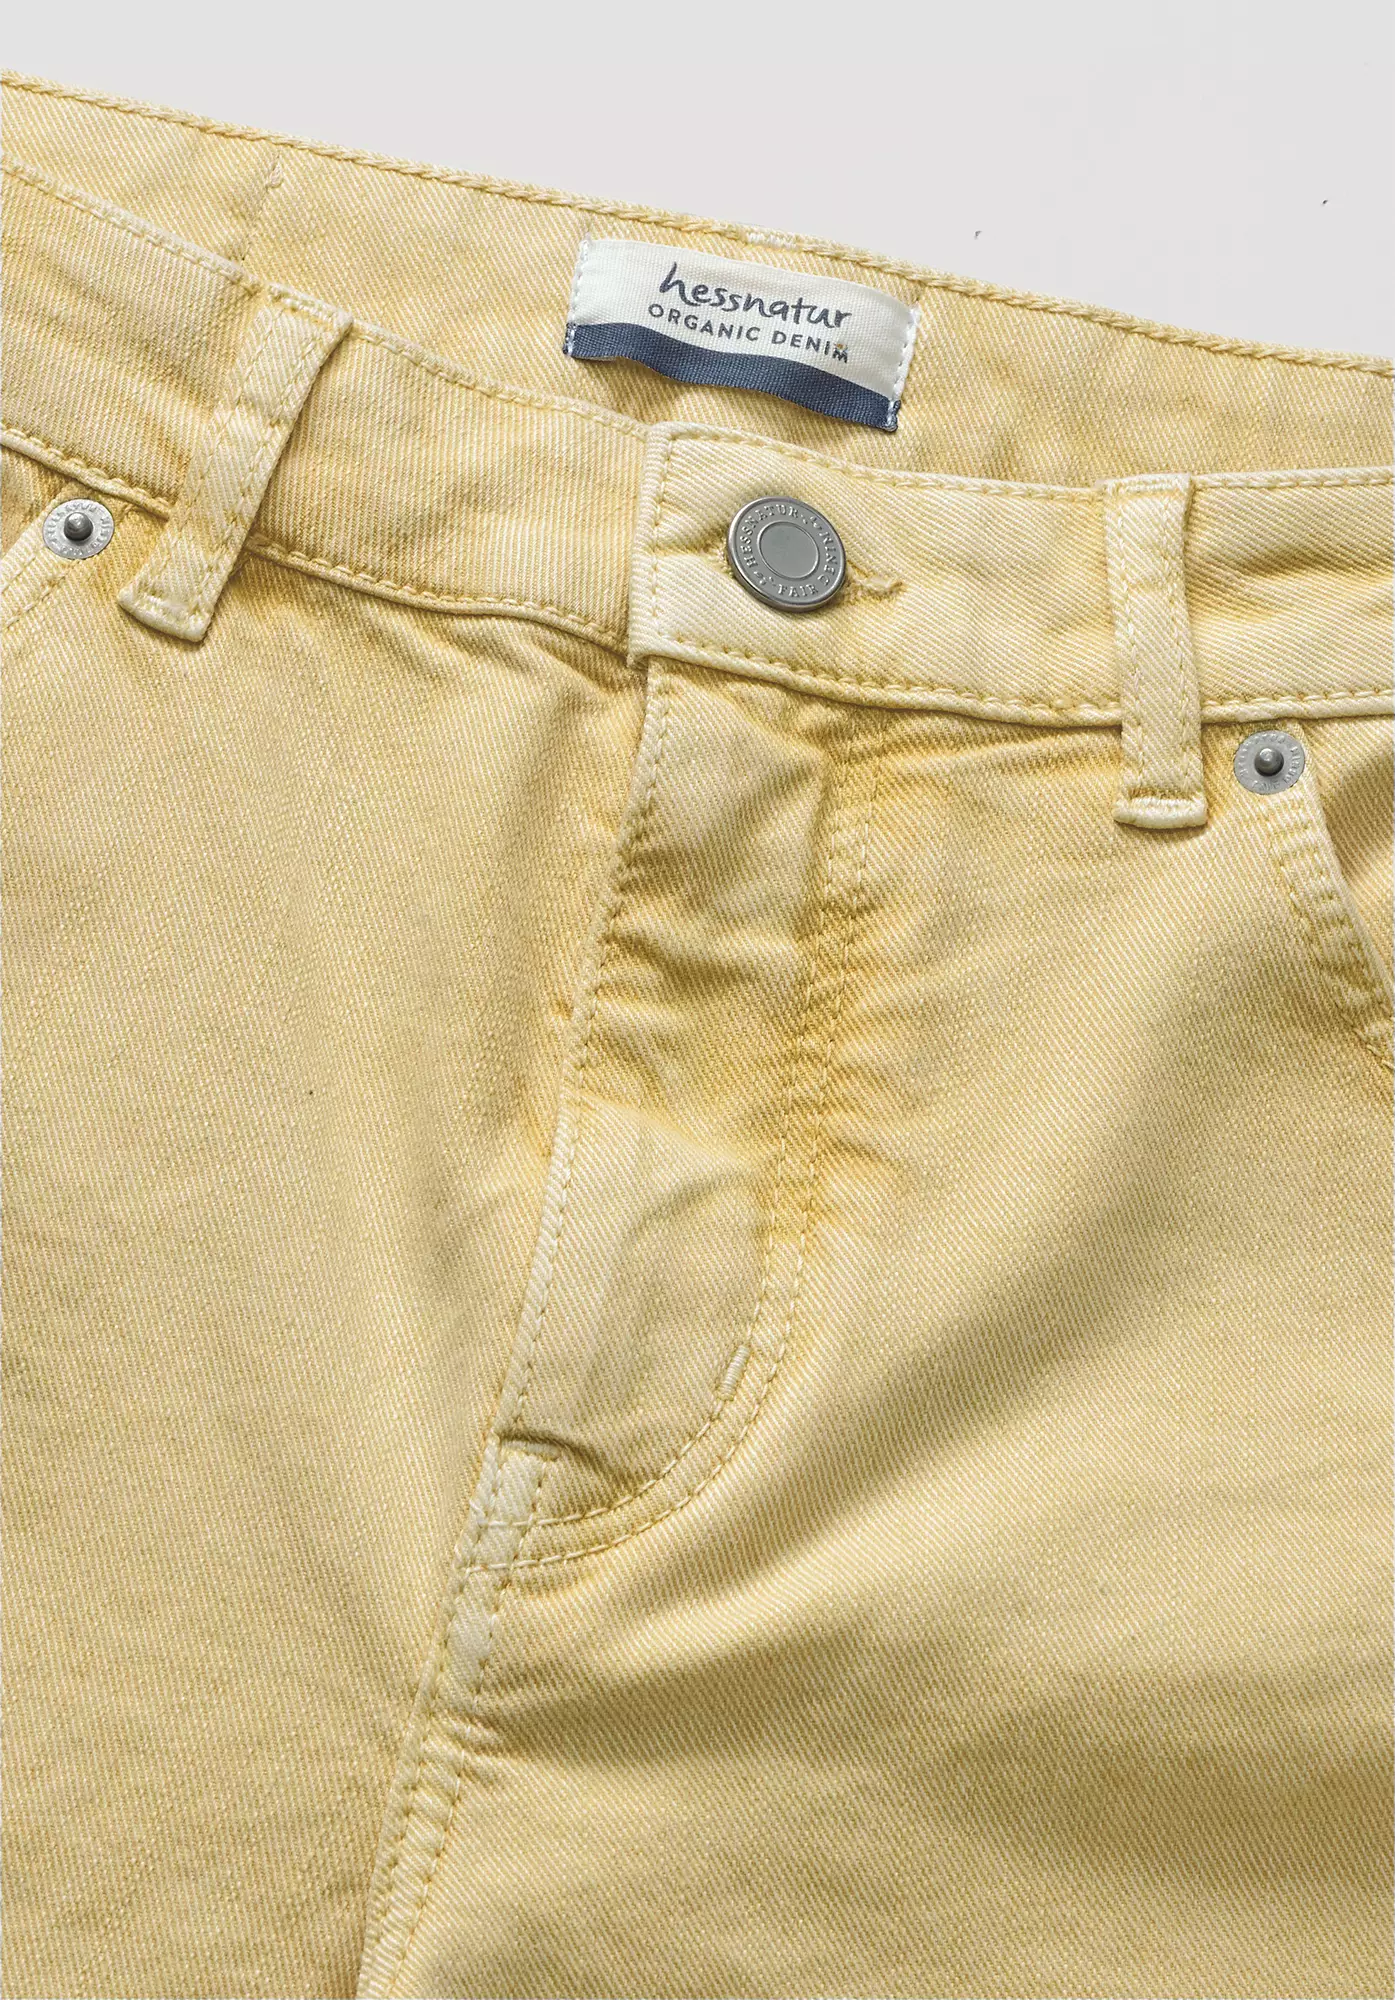 Mineral-dyed shorts made from organic denim - 5